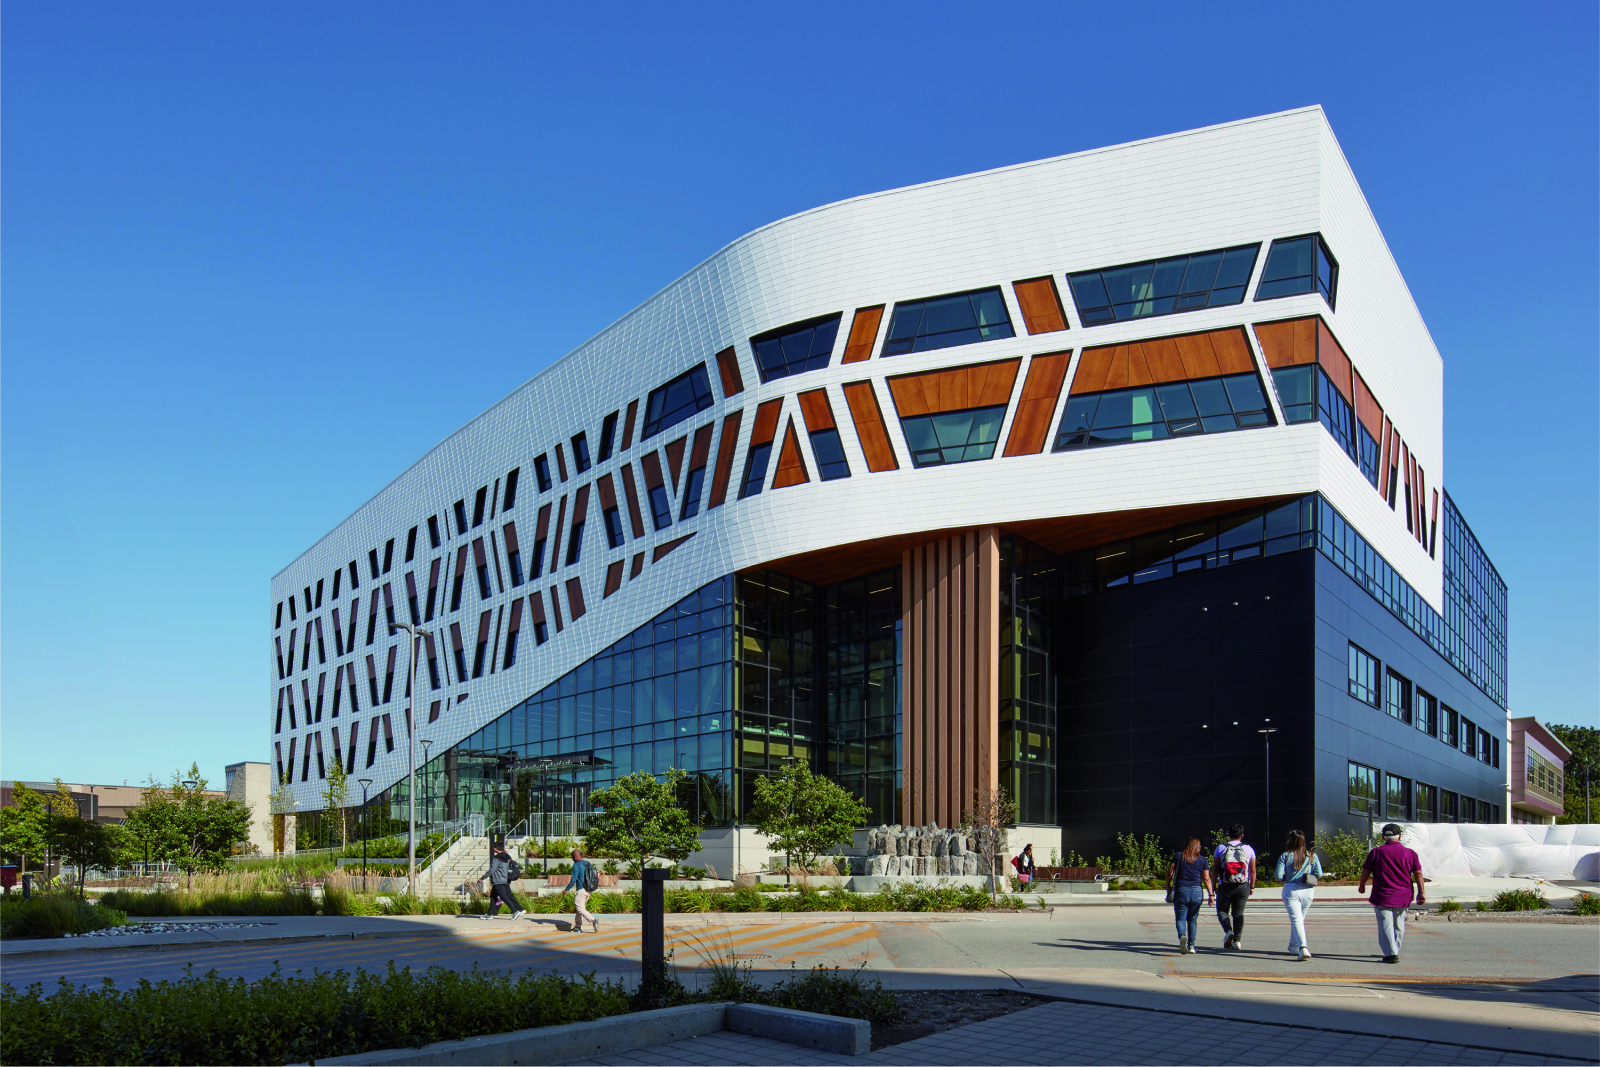 Exterior view of the Centennial College with four users approaching the building entrance